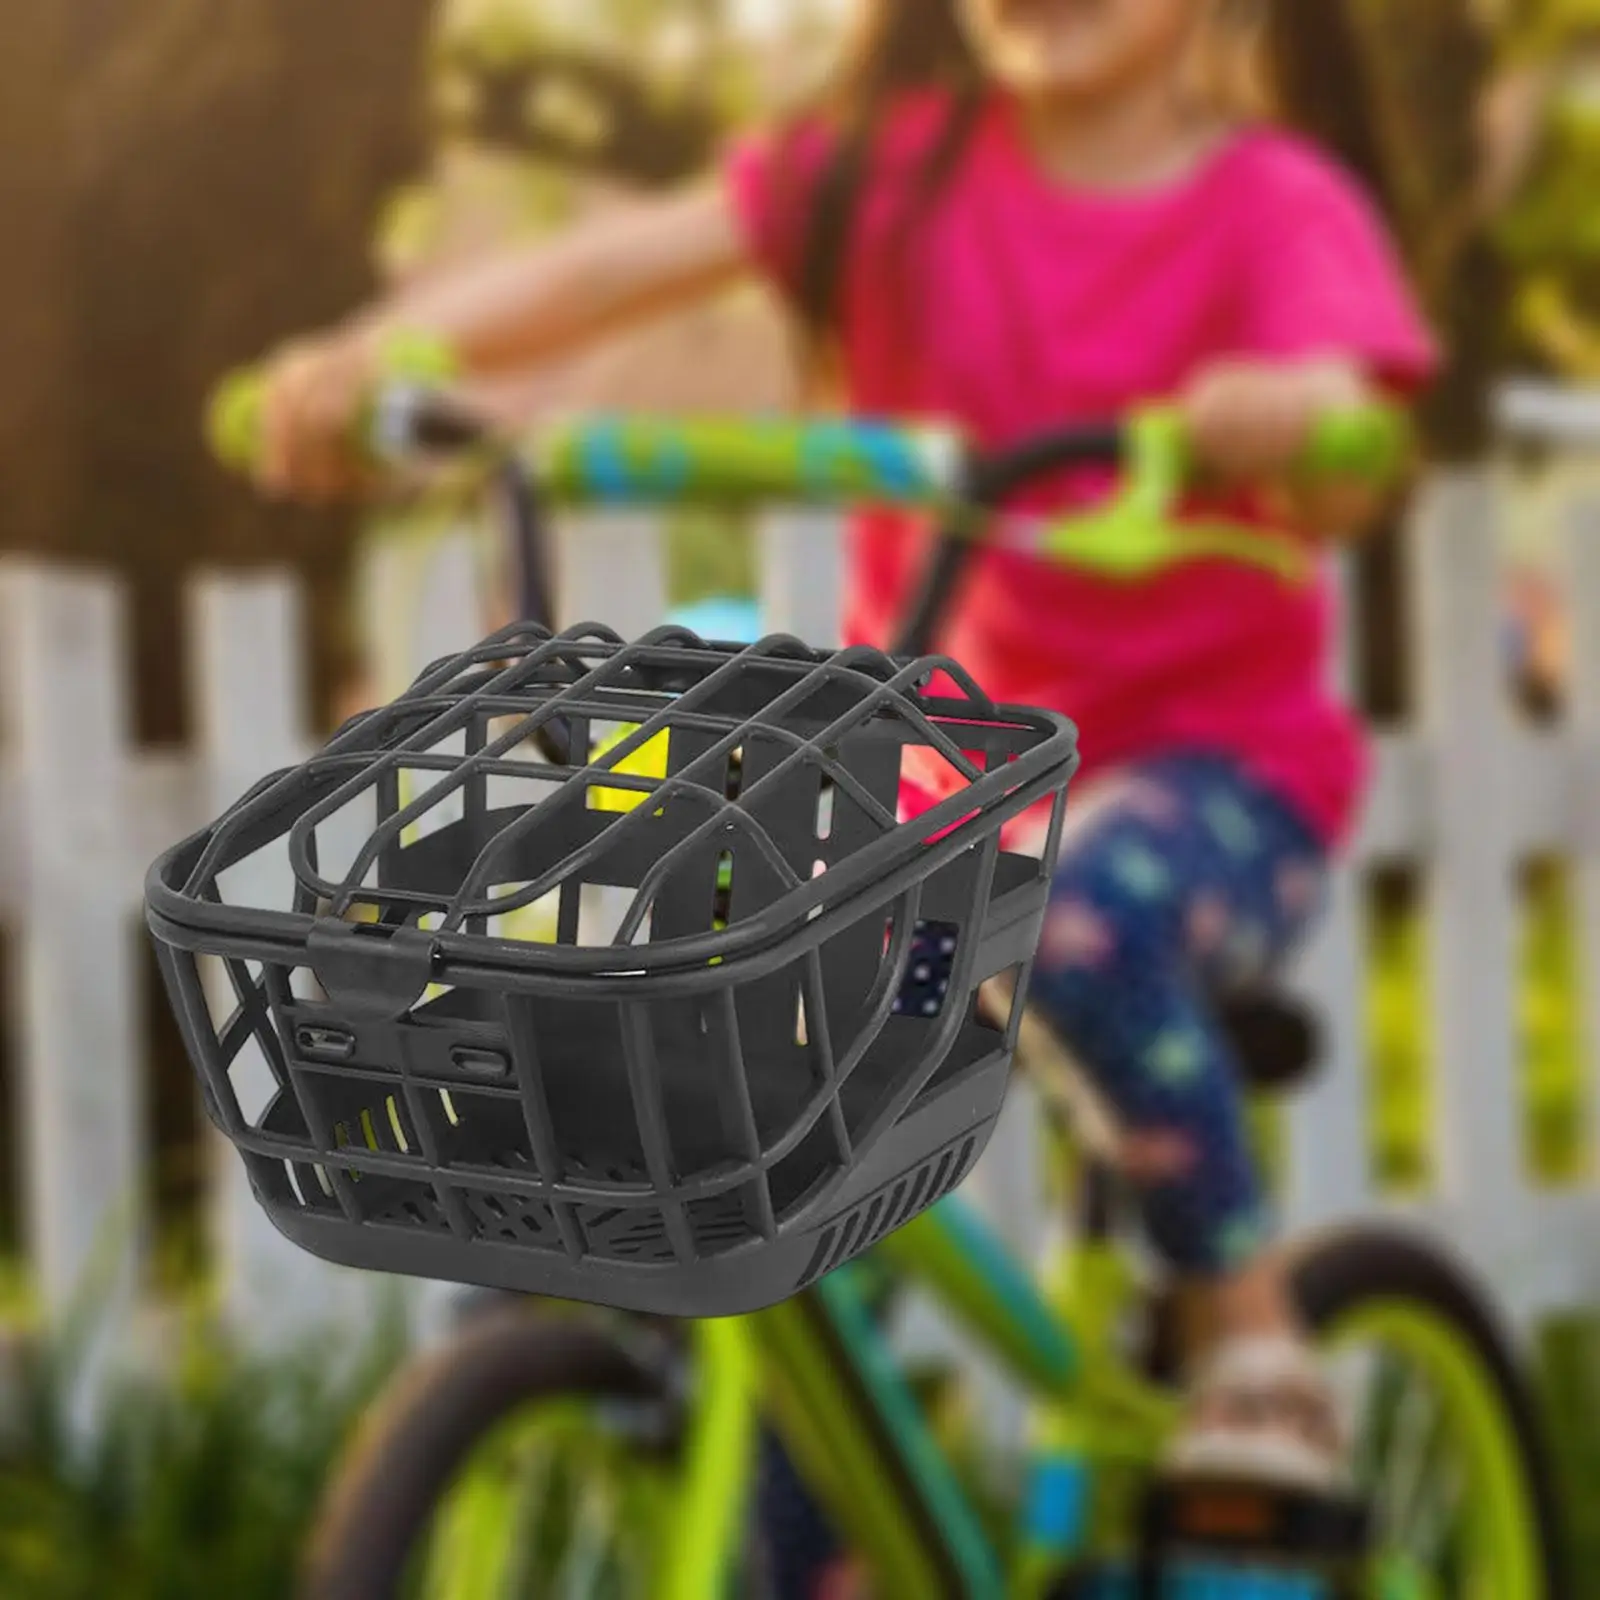 Front Bike Basket Bicycle Cargo Rack Large Capacity Durable Bike Storage Basket with Cover Bicycle Basket for Mountain Bikes